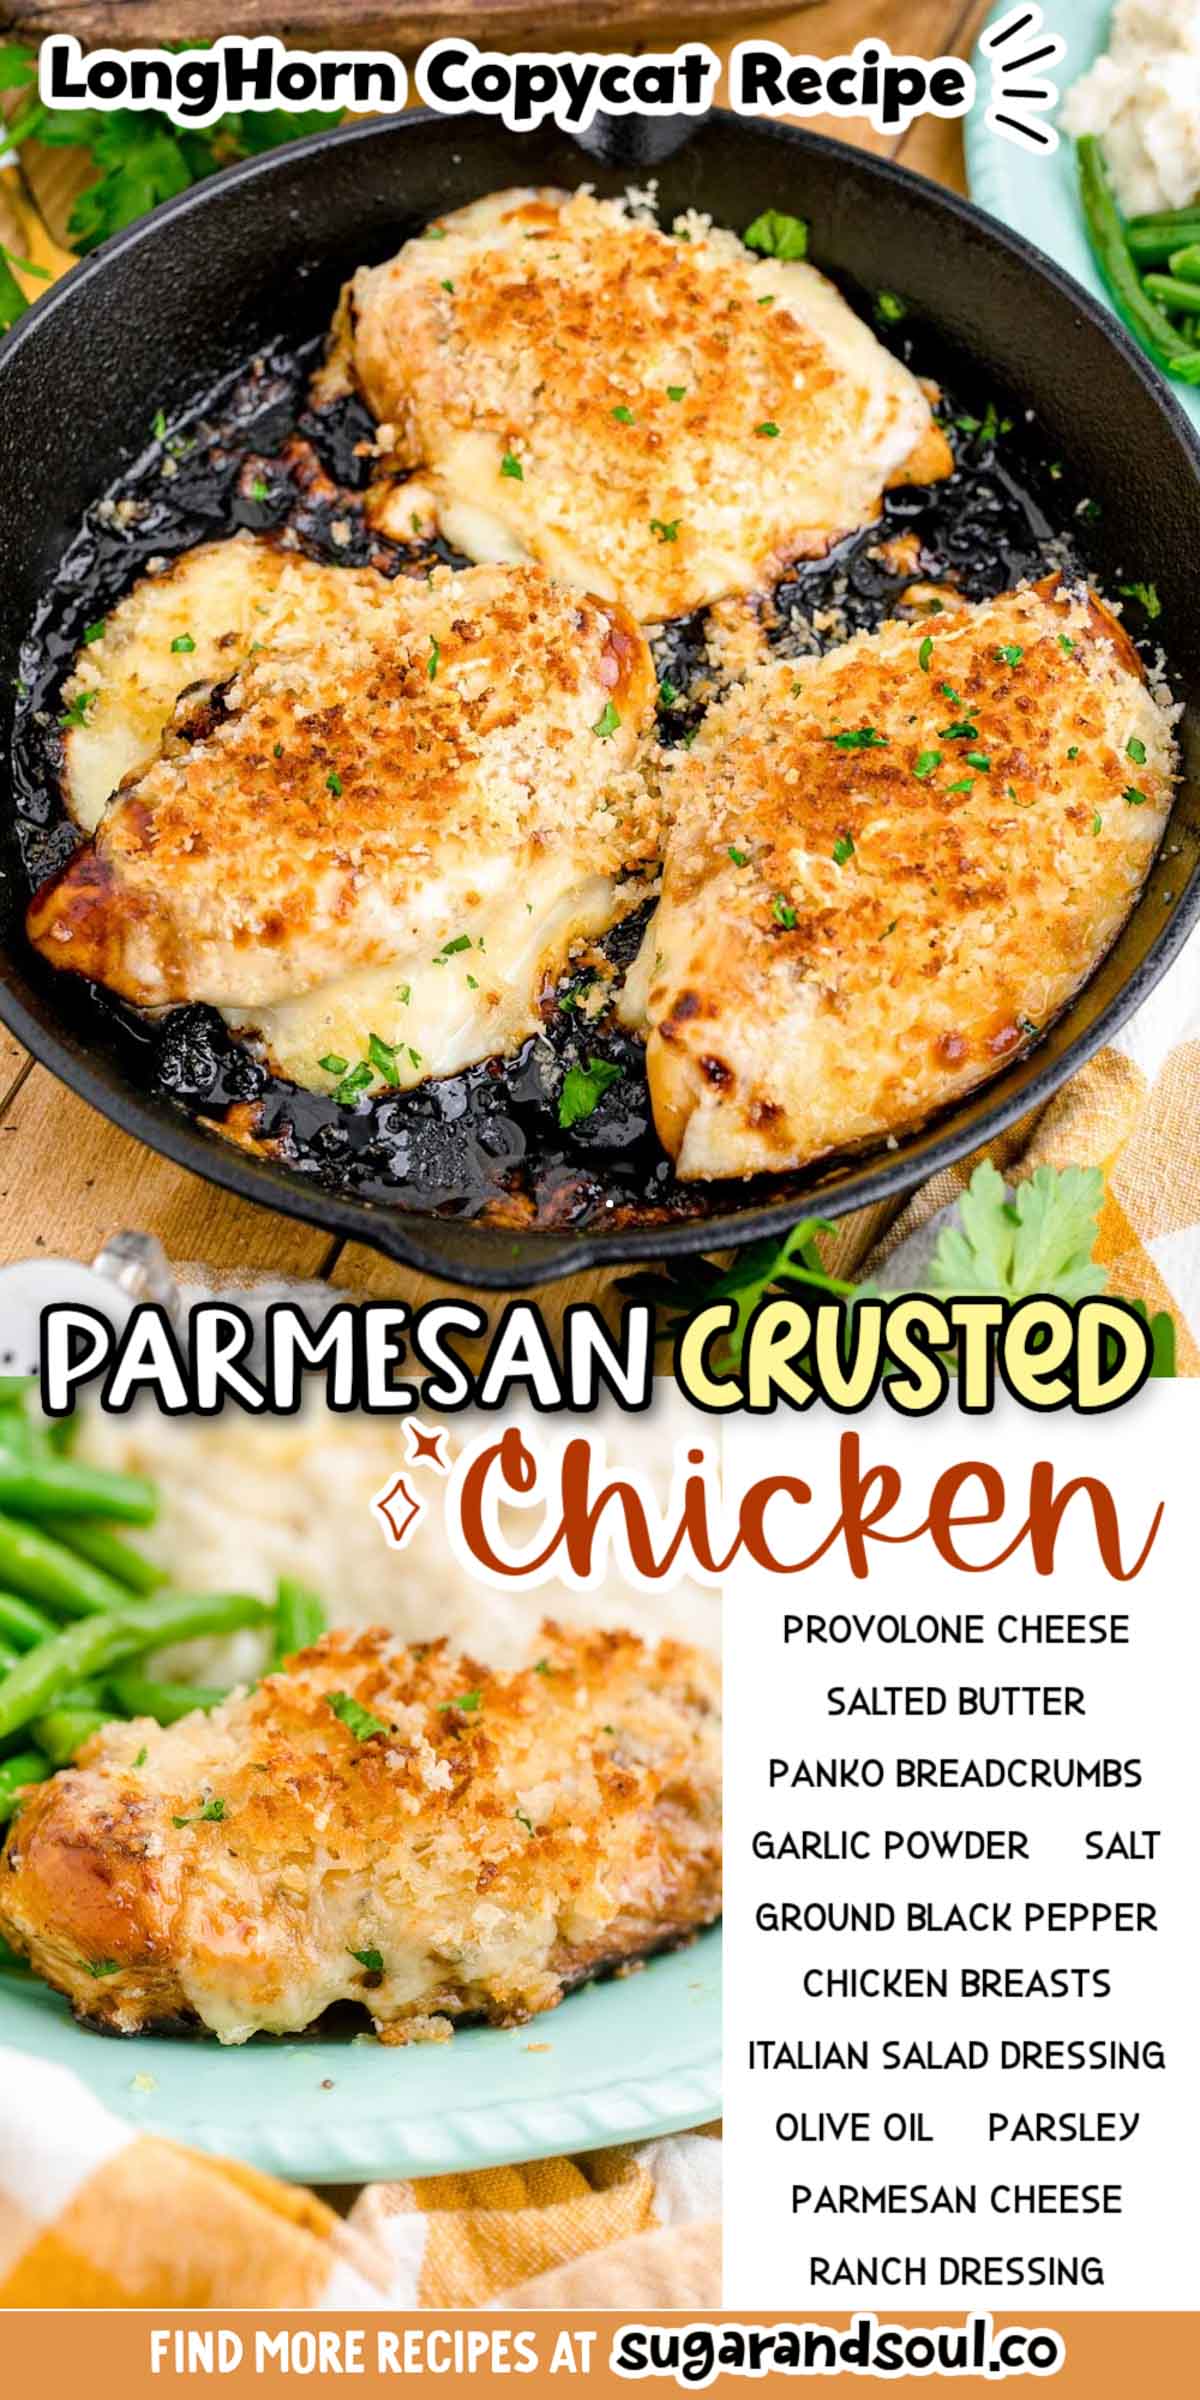 Parmesan Crusted Chicken is a tasty LongHorn copycat recipe that's made with provolone cheese, ranch, and a seasoned breadcrumb mixture! Skip the trip to the restaurant and make this easy recipe right at home! via @sugarandsoulco